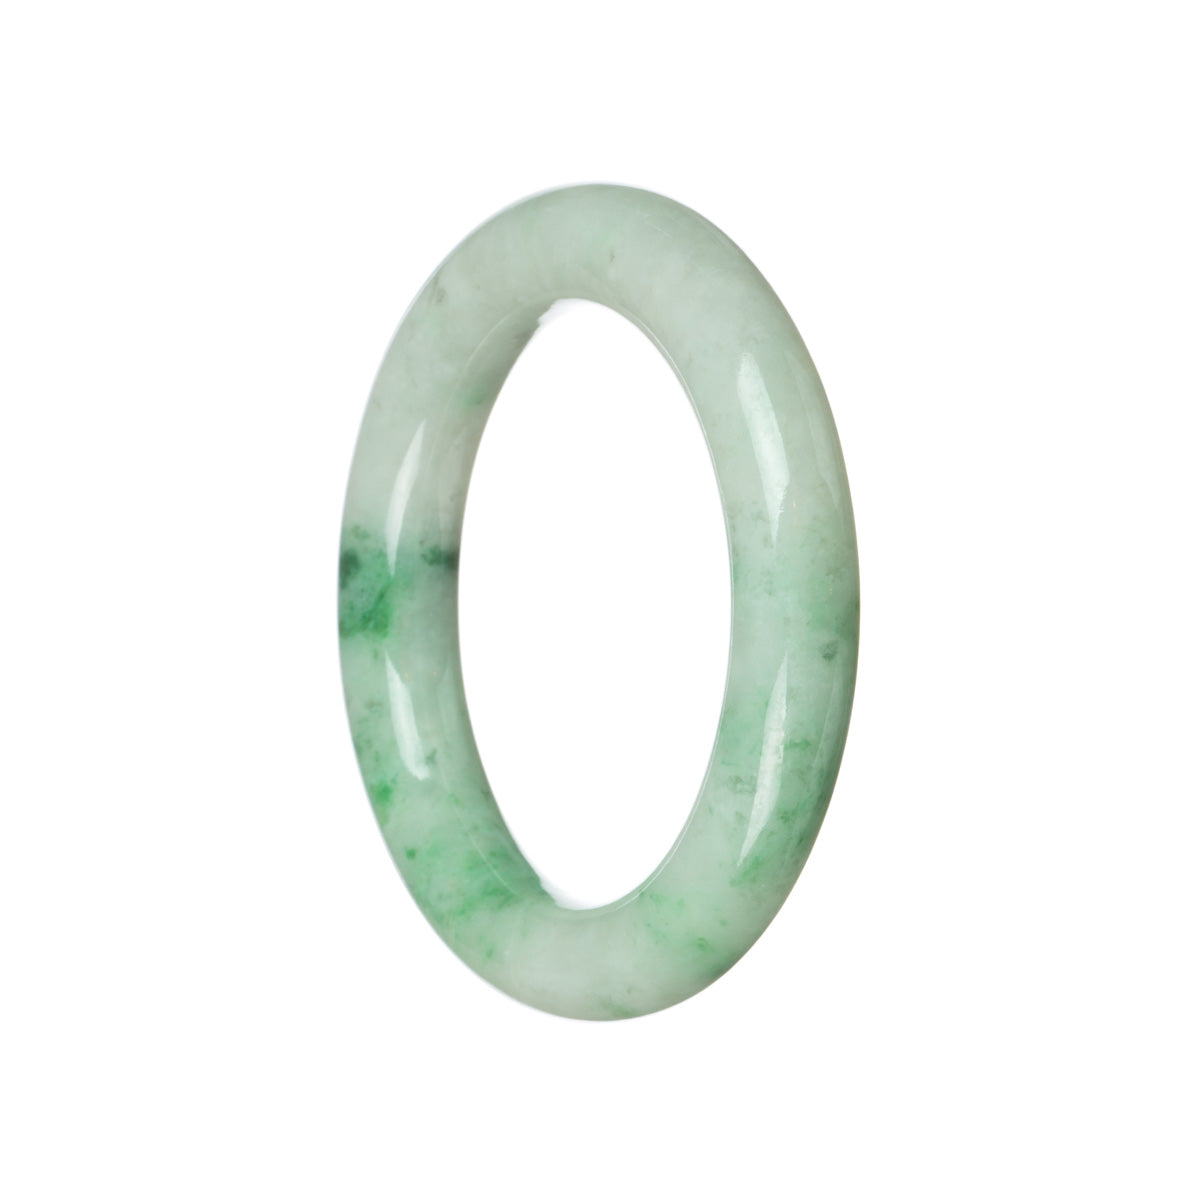 Authentic Type A White with emerald green Jadeite Jade Bangle - 56mm Round